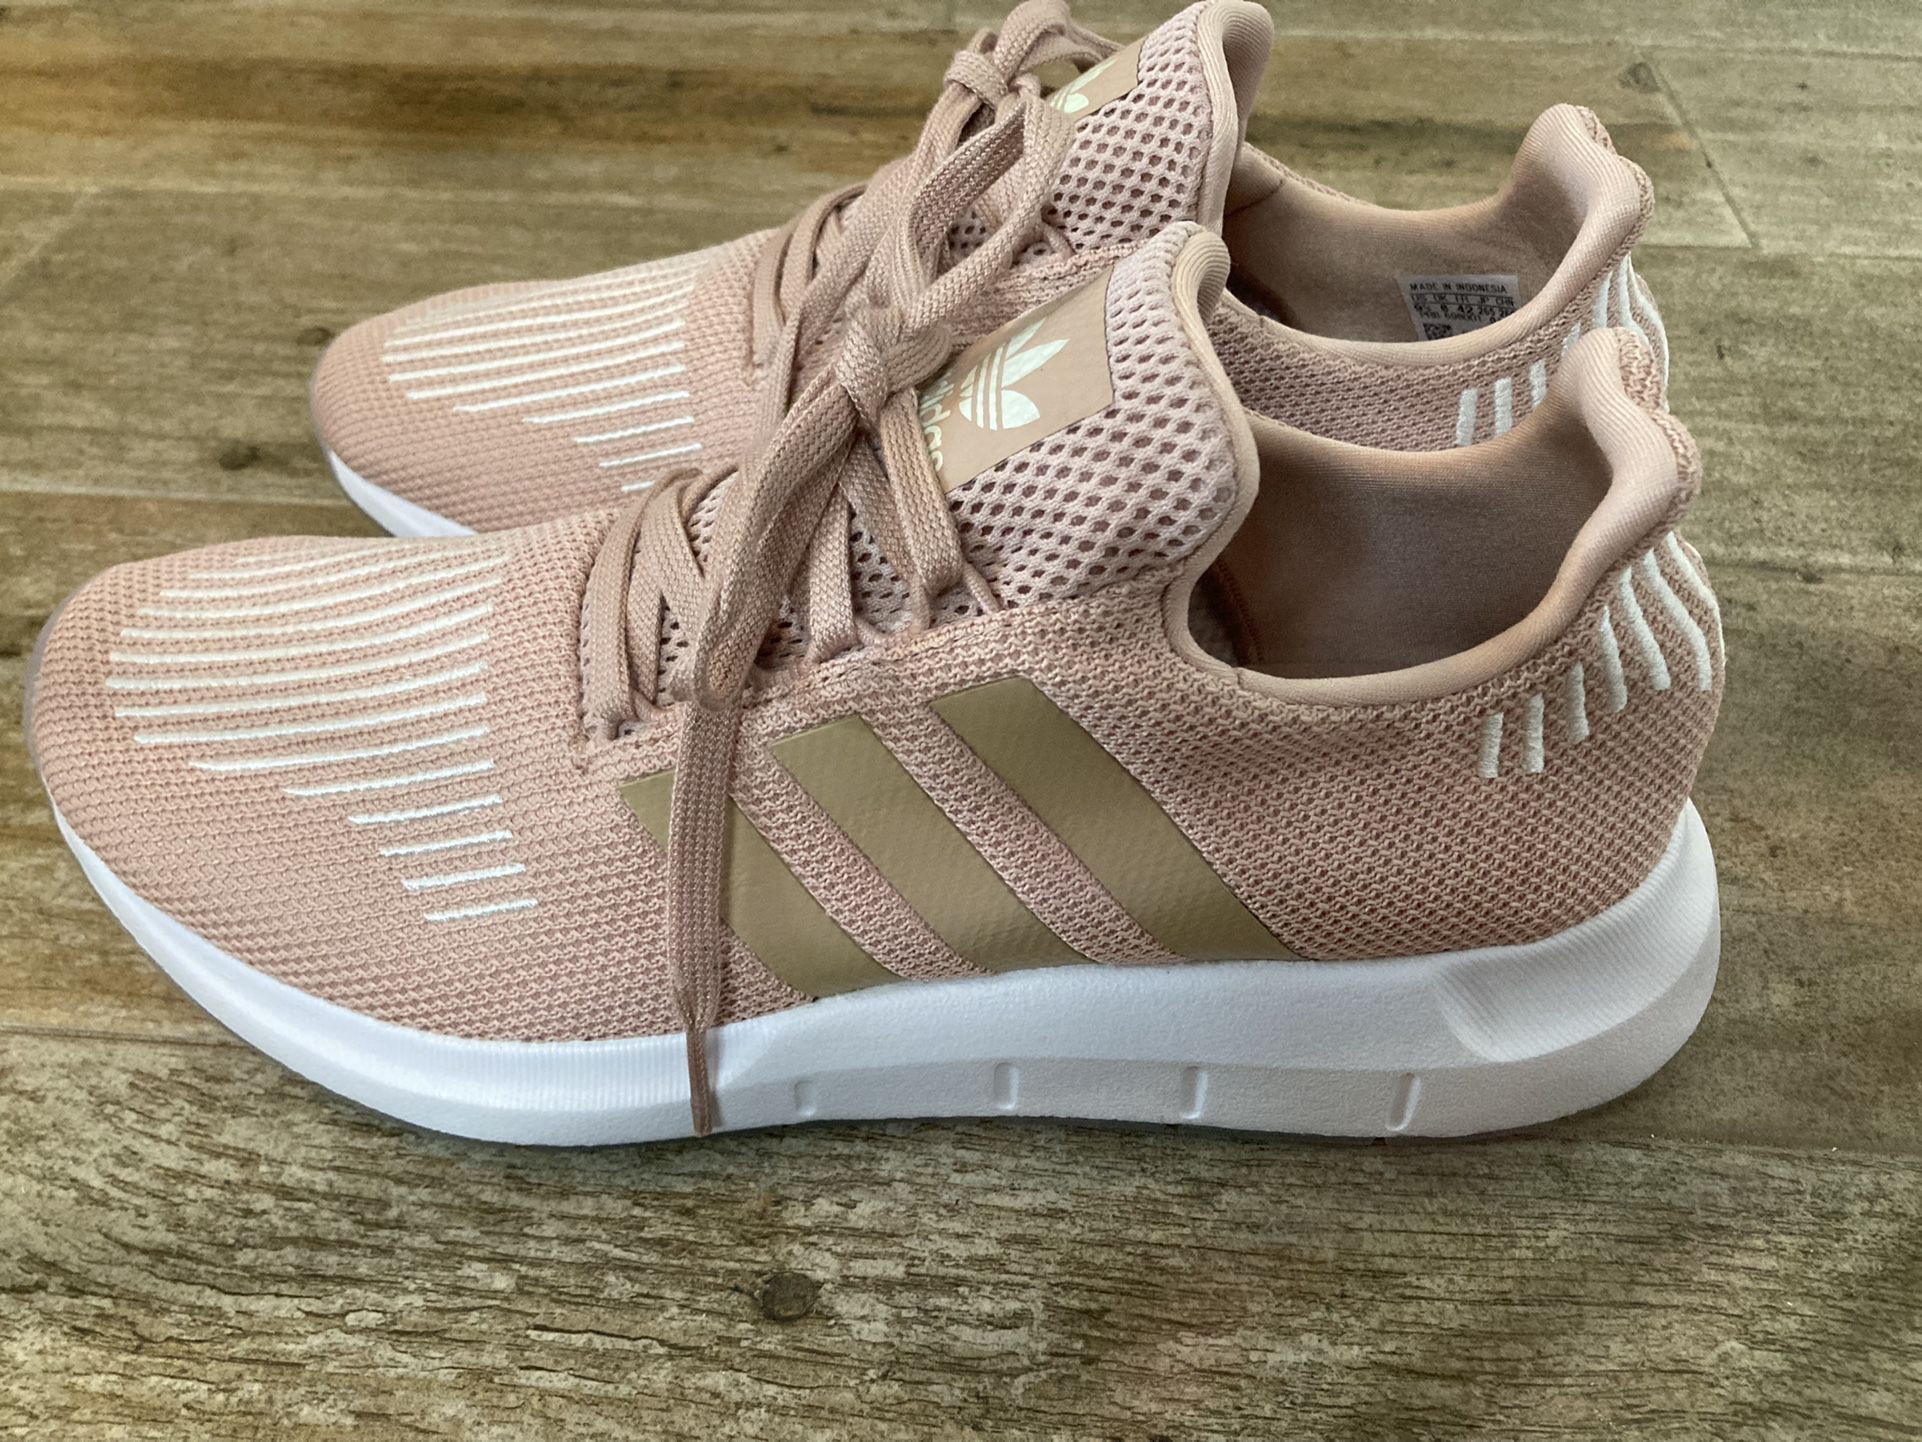 farvel Grudge sagging NEW Adidas Originals Womens Swift Run Shoes for Sale in Glendale, AZ -  OfferUp